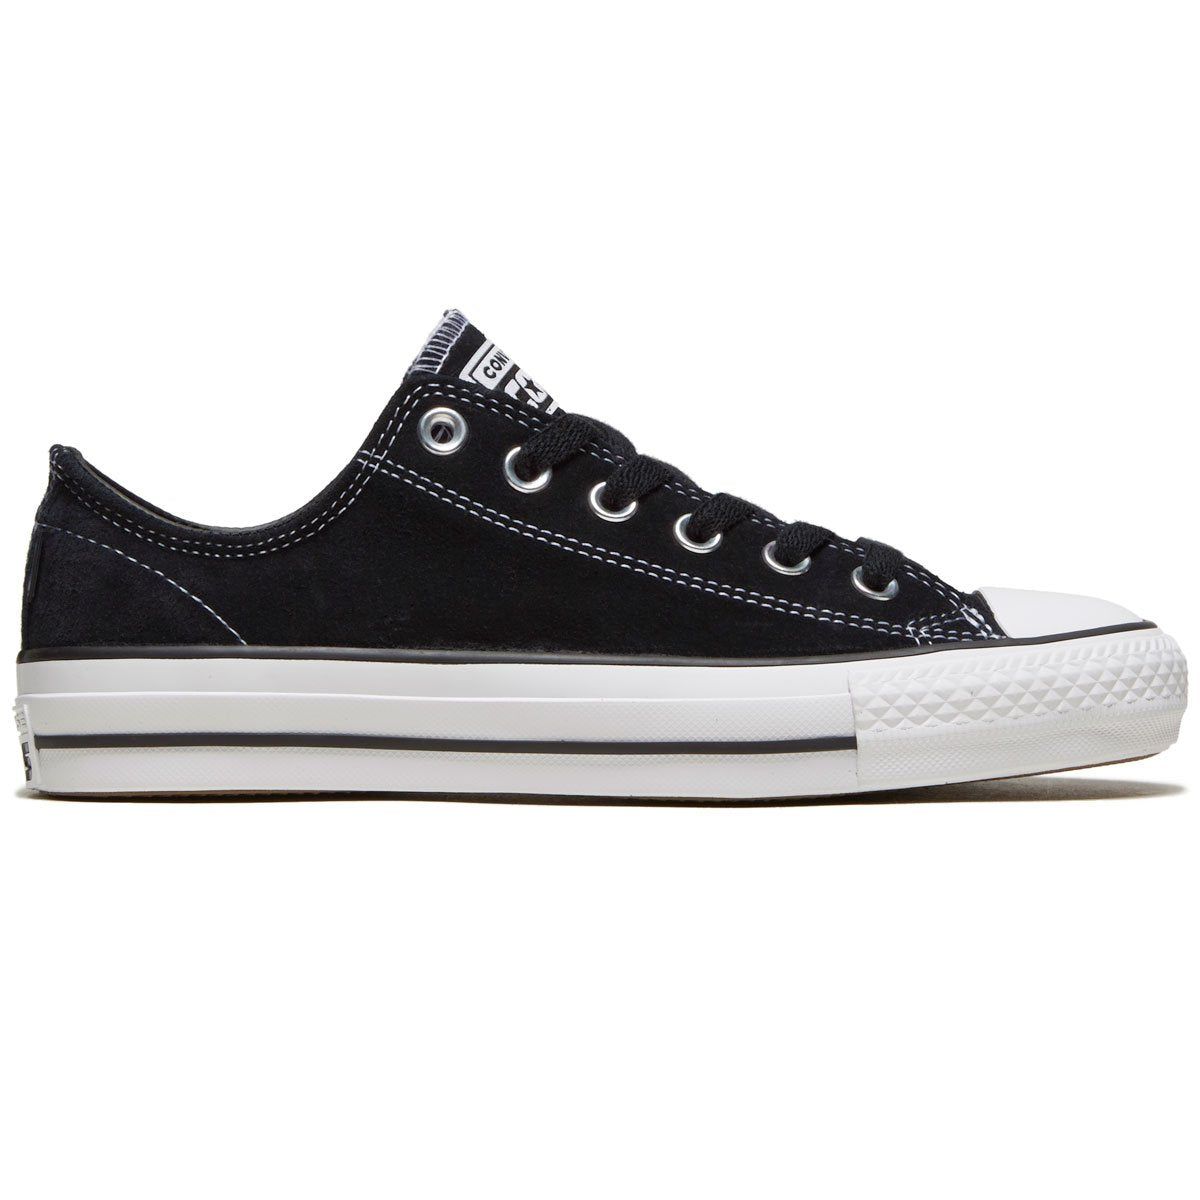 Converse Chuck Taylor All Star Pro Suede Ox Shoes - Black/Black/White image 1